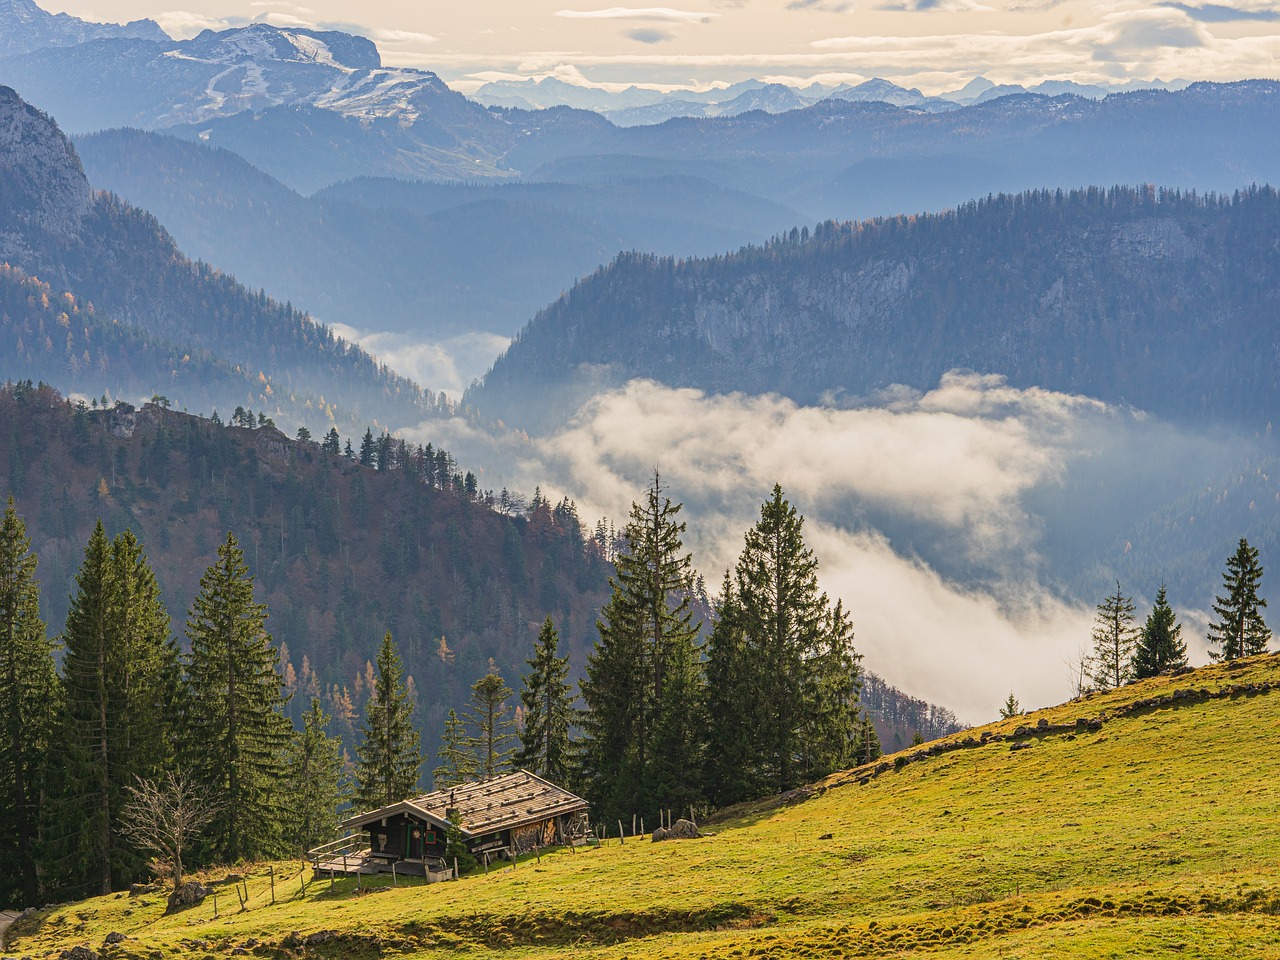 a cow standing on top of a lush green hillside, a stock photo, by Franz Hegi, shutterstock, log cabin beneath the alps, winter mist around her, dramatic autumn landscape, covered in clouds